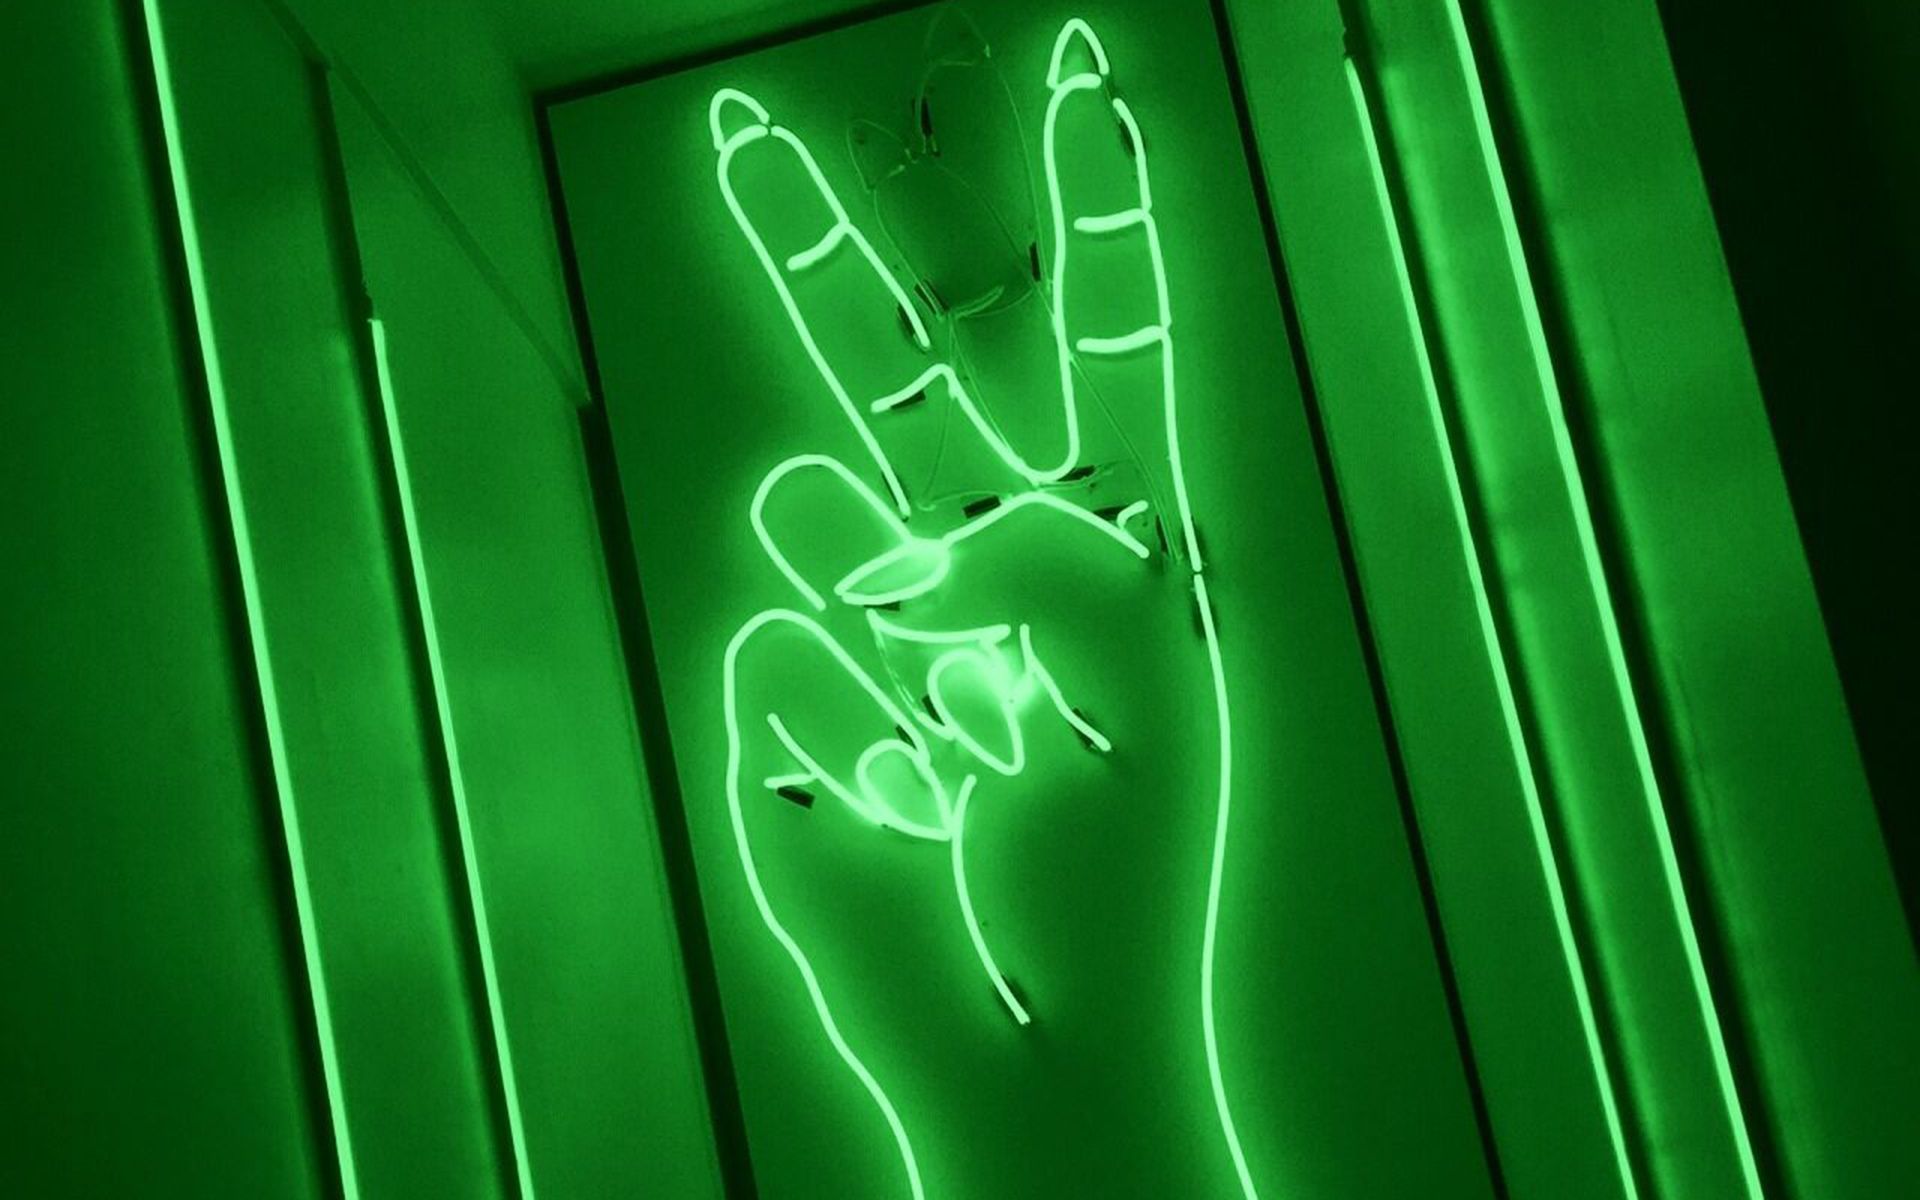 A neon green hand making the peace sign - Dark green, green, lime green